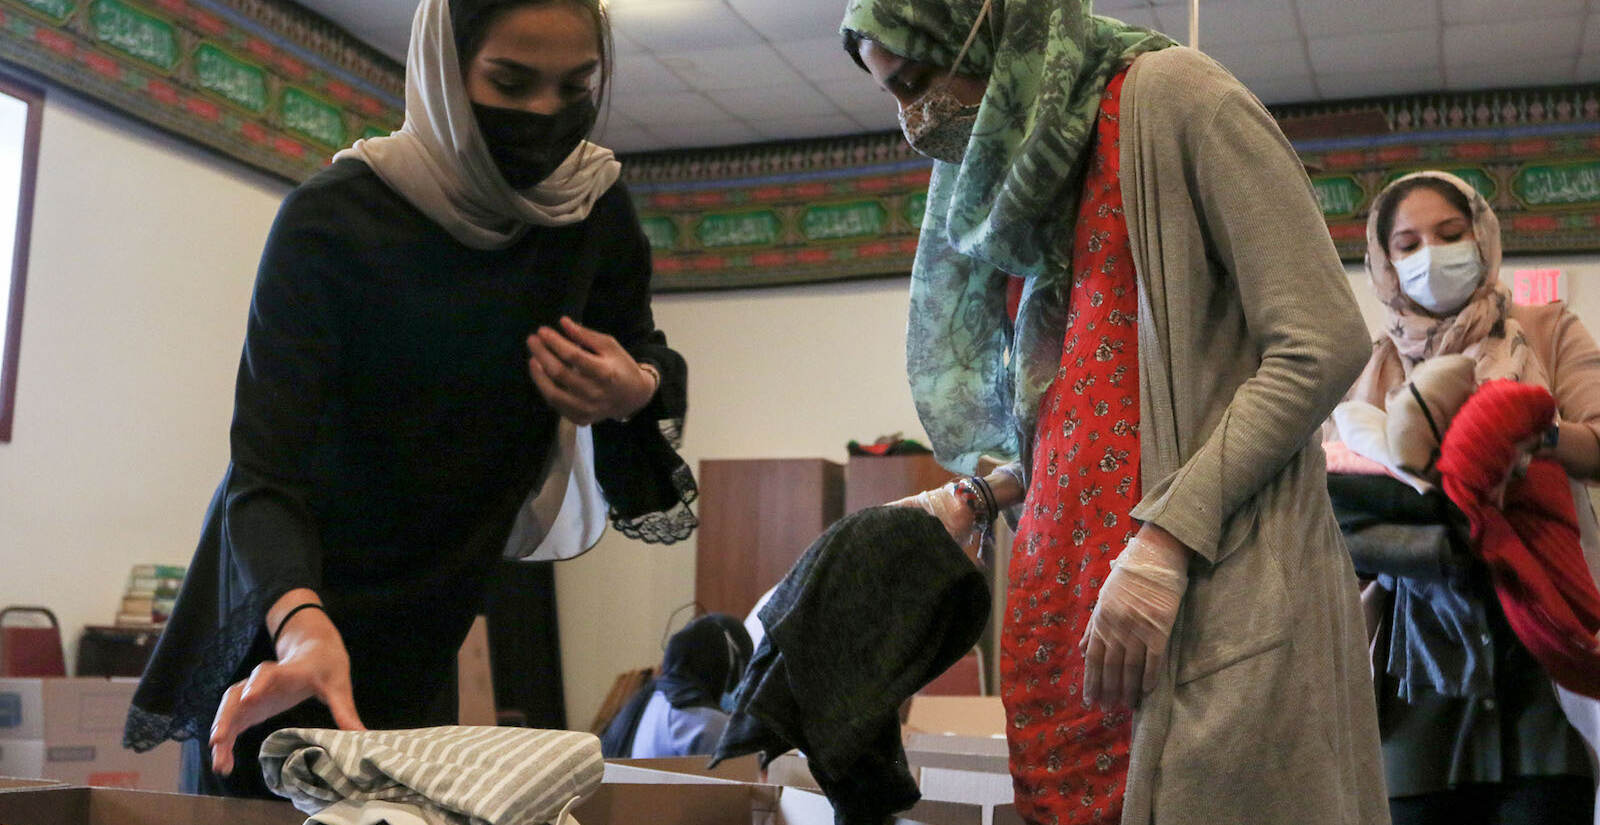 [l-r]: Sarah Ahmad, a mosque attendee from Moorestown, Tahmina Achekzai, communications manager at AOPxSOLA, and Rona Farighi, community outreach and healthcare coordinator at AOPxSOLA, sorting donations.
A donation pack up for incoming Afghan refugees run by AOPxSOLA and members of Imam Ali Masjid Mosque at Imam Ali Masjid Mosque in Pennsauken, NJ on 11/14/21.
[DANIELLA HEMINGHAUS]